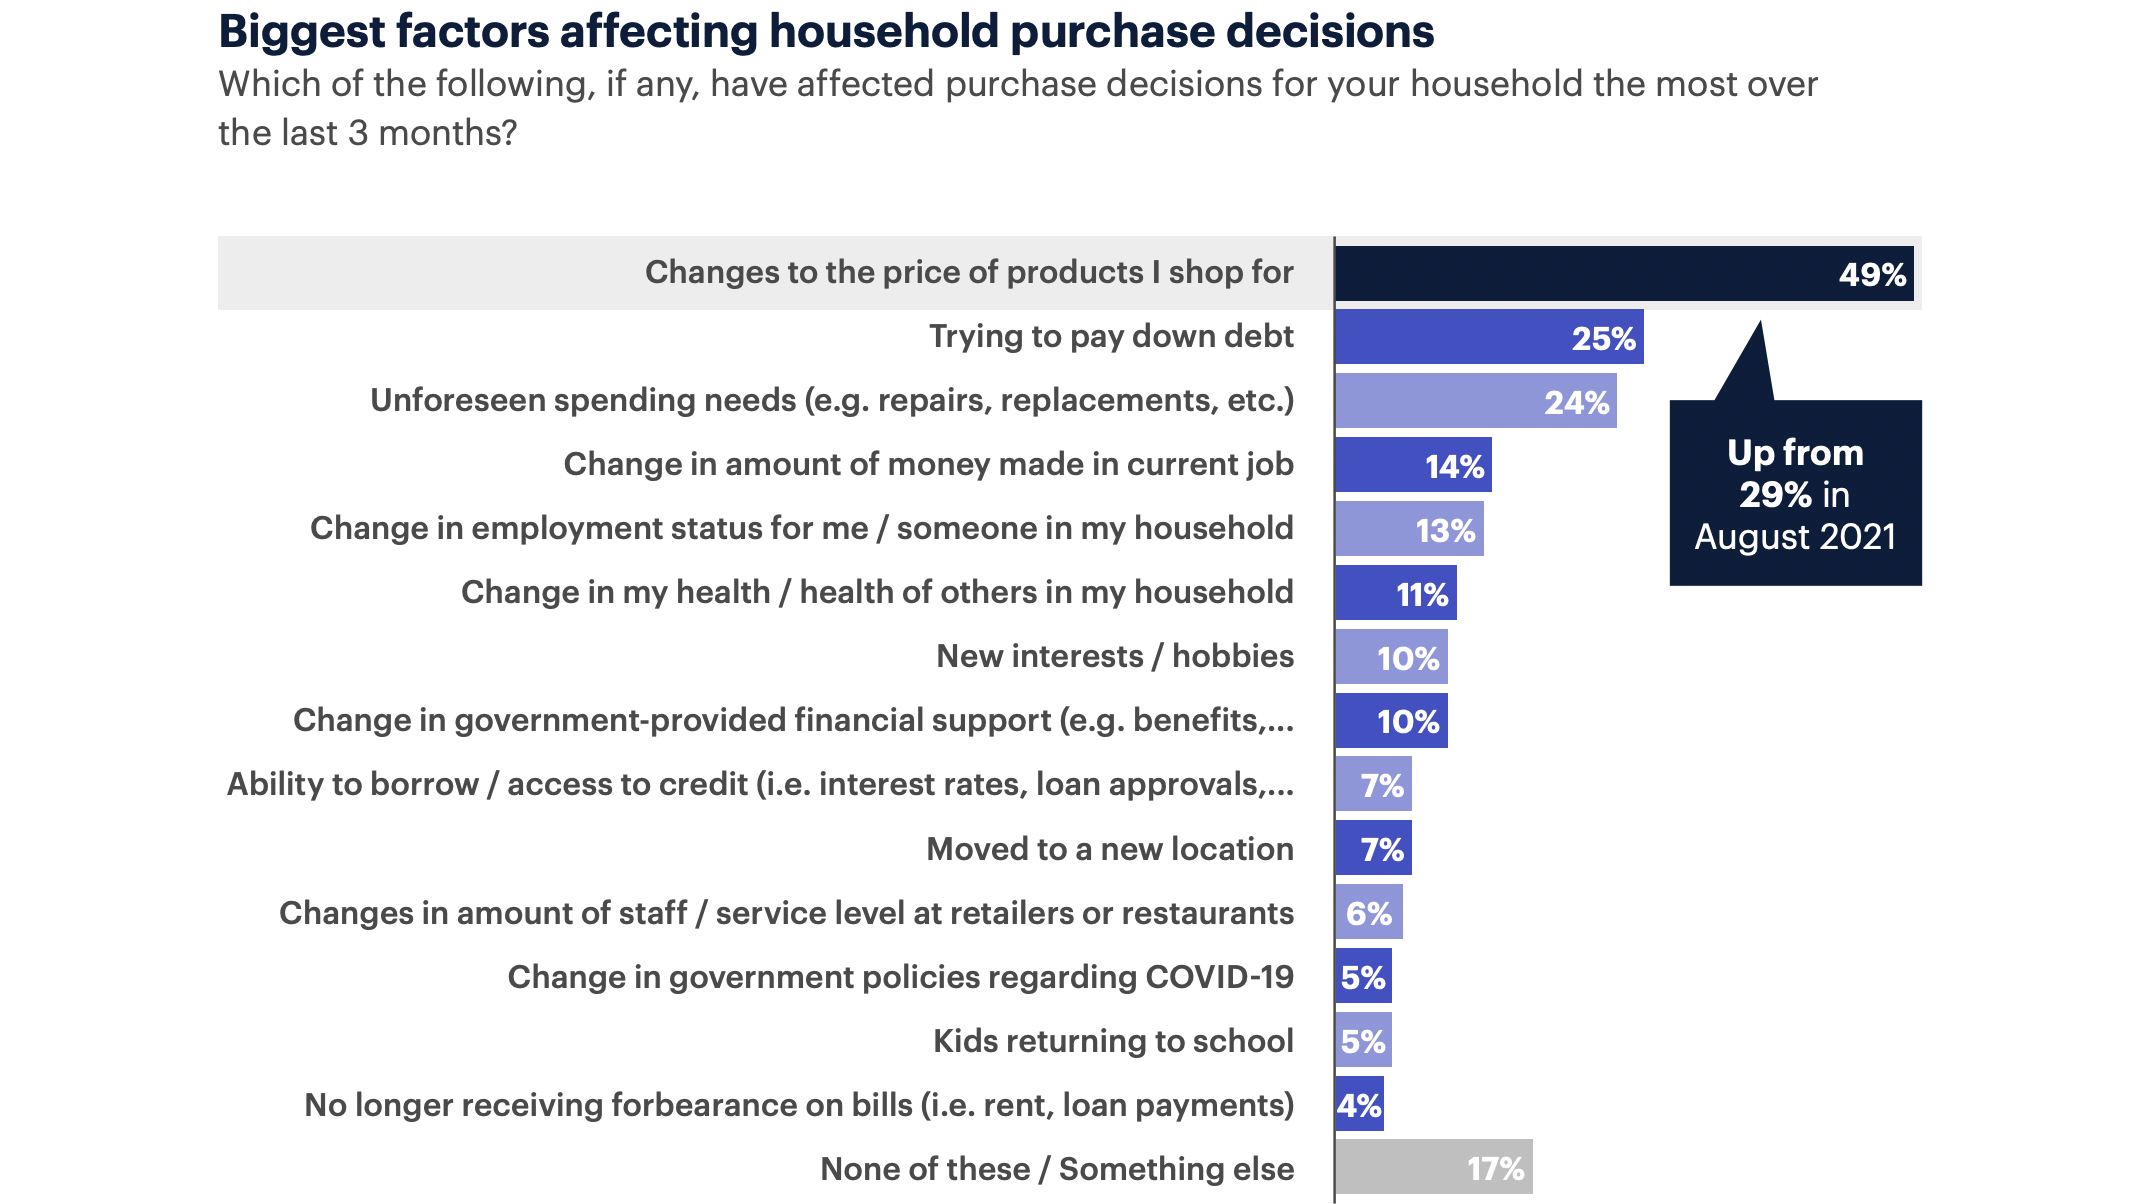 Biggest factors affecting household purchase decisions; 49% state they’ve noticed changes to the price of products they shop for